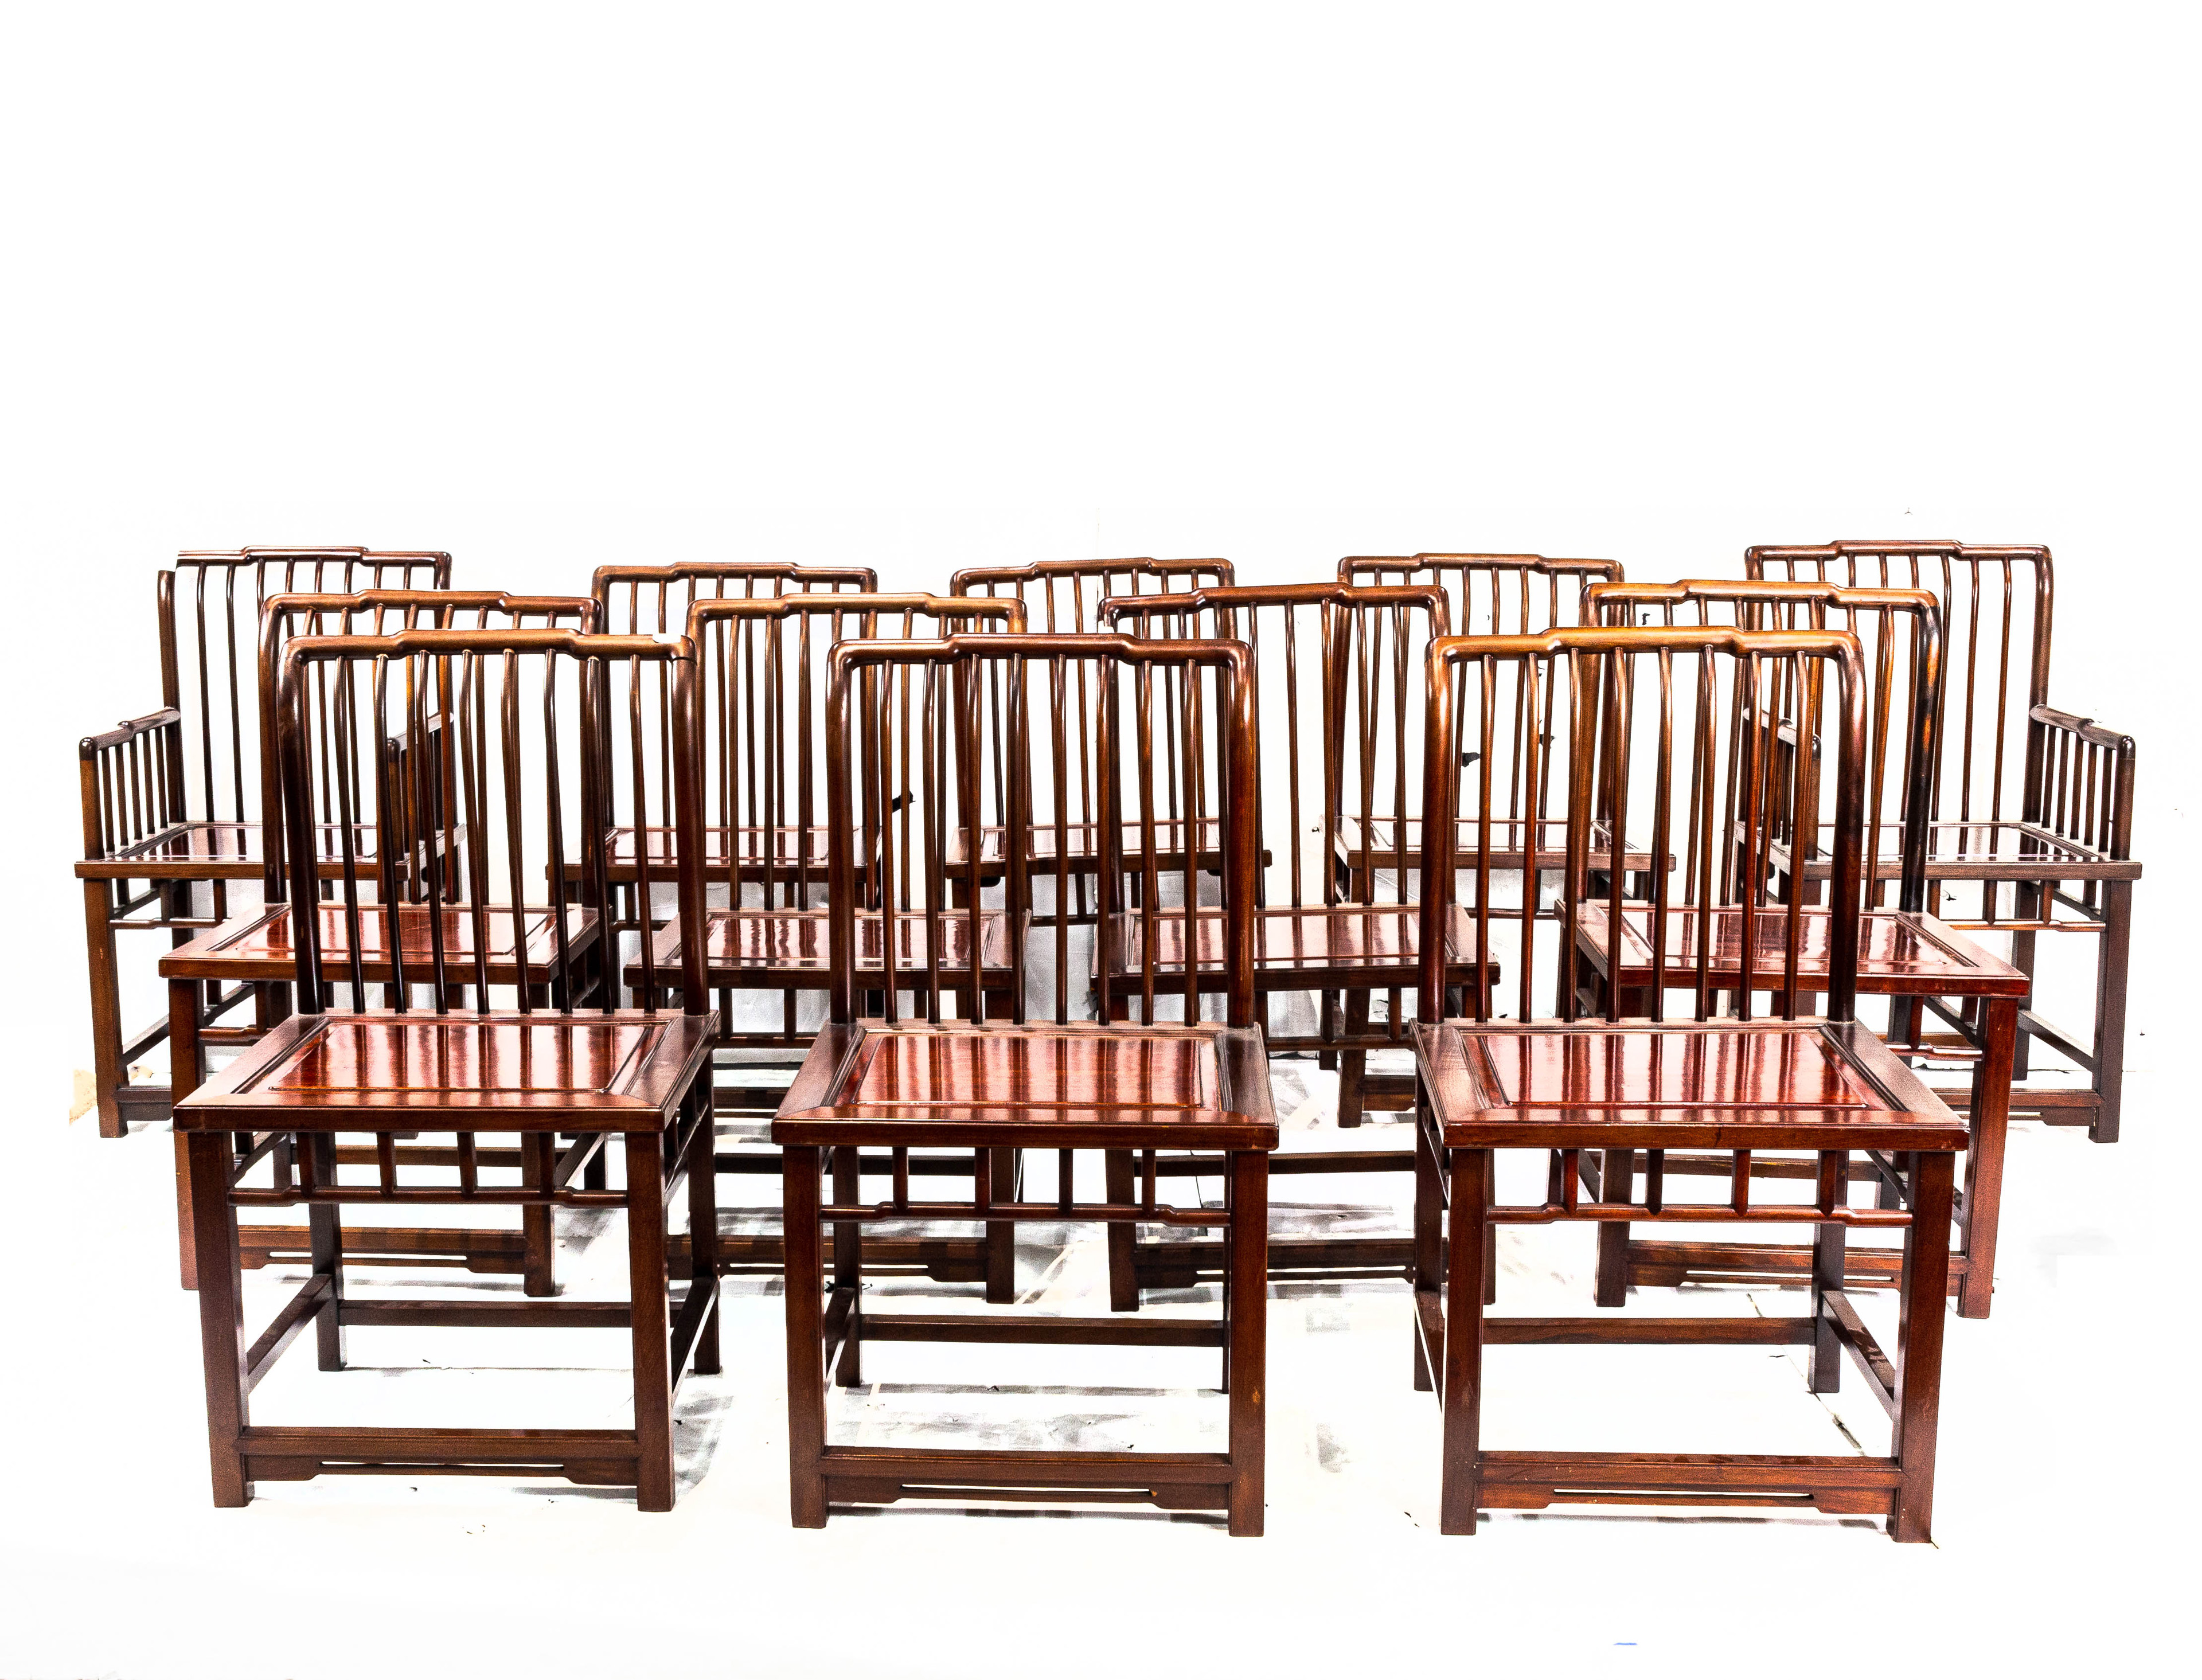  LOT OF 14 CHINESE HARDWOOD DINING 3a4de5